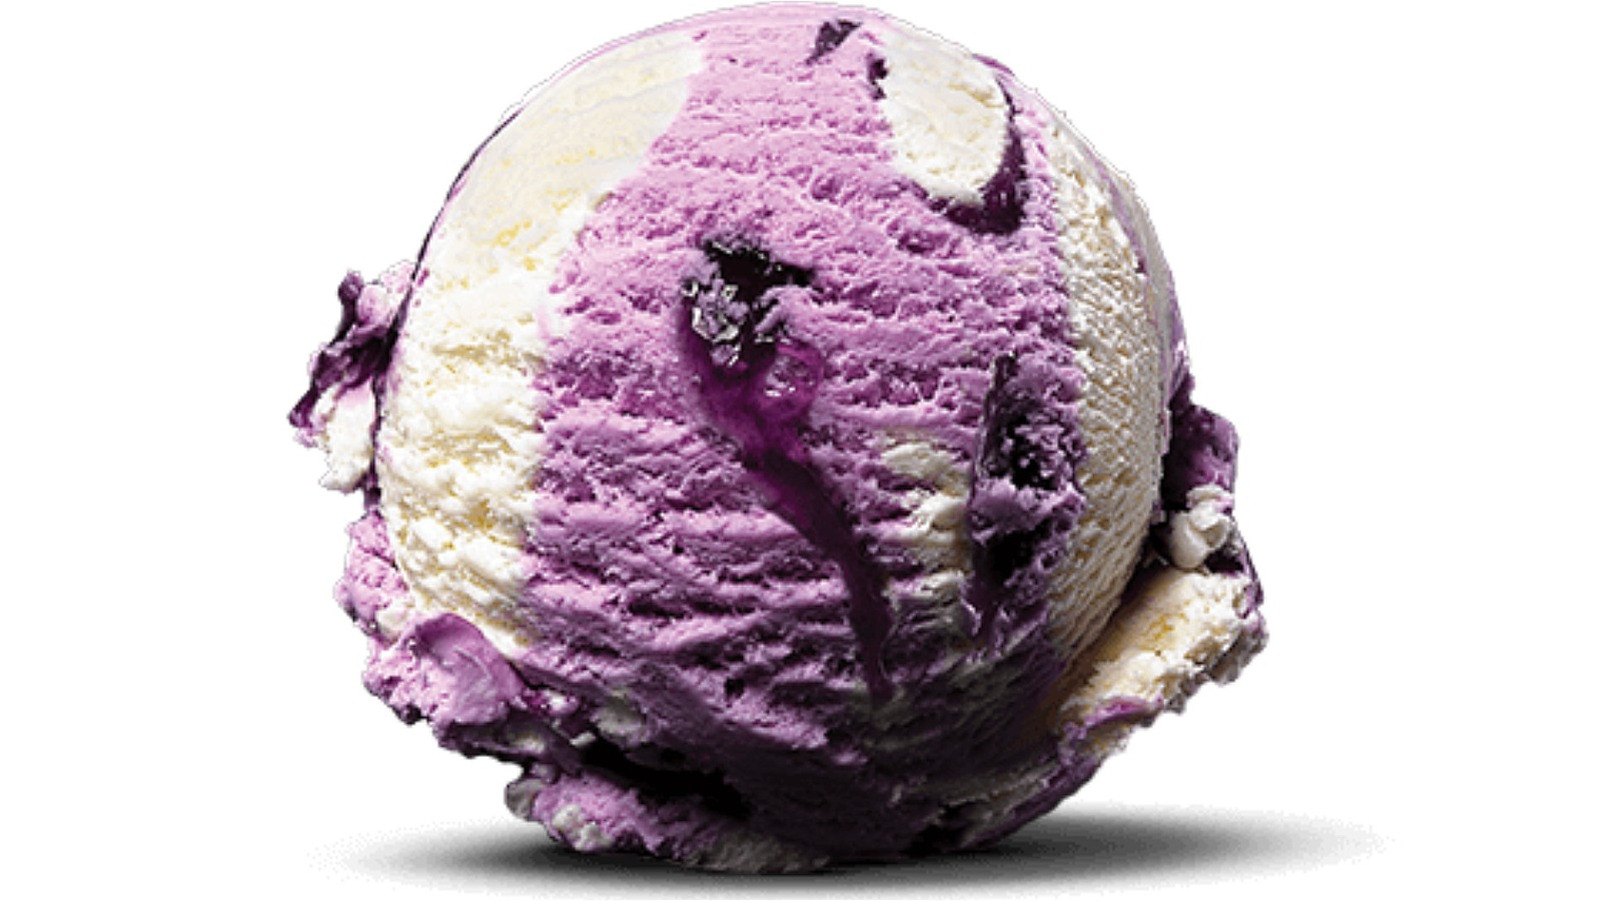 What You Need To Know About Baskin Robbins New Ube Coconut Swirl